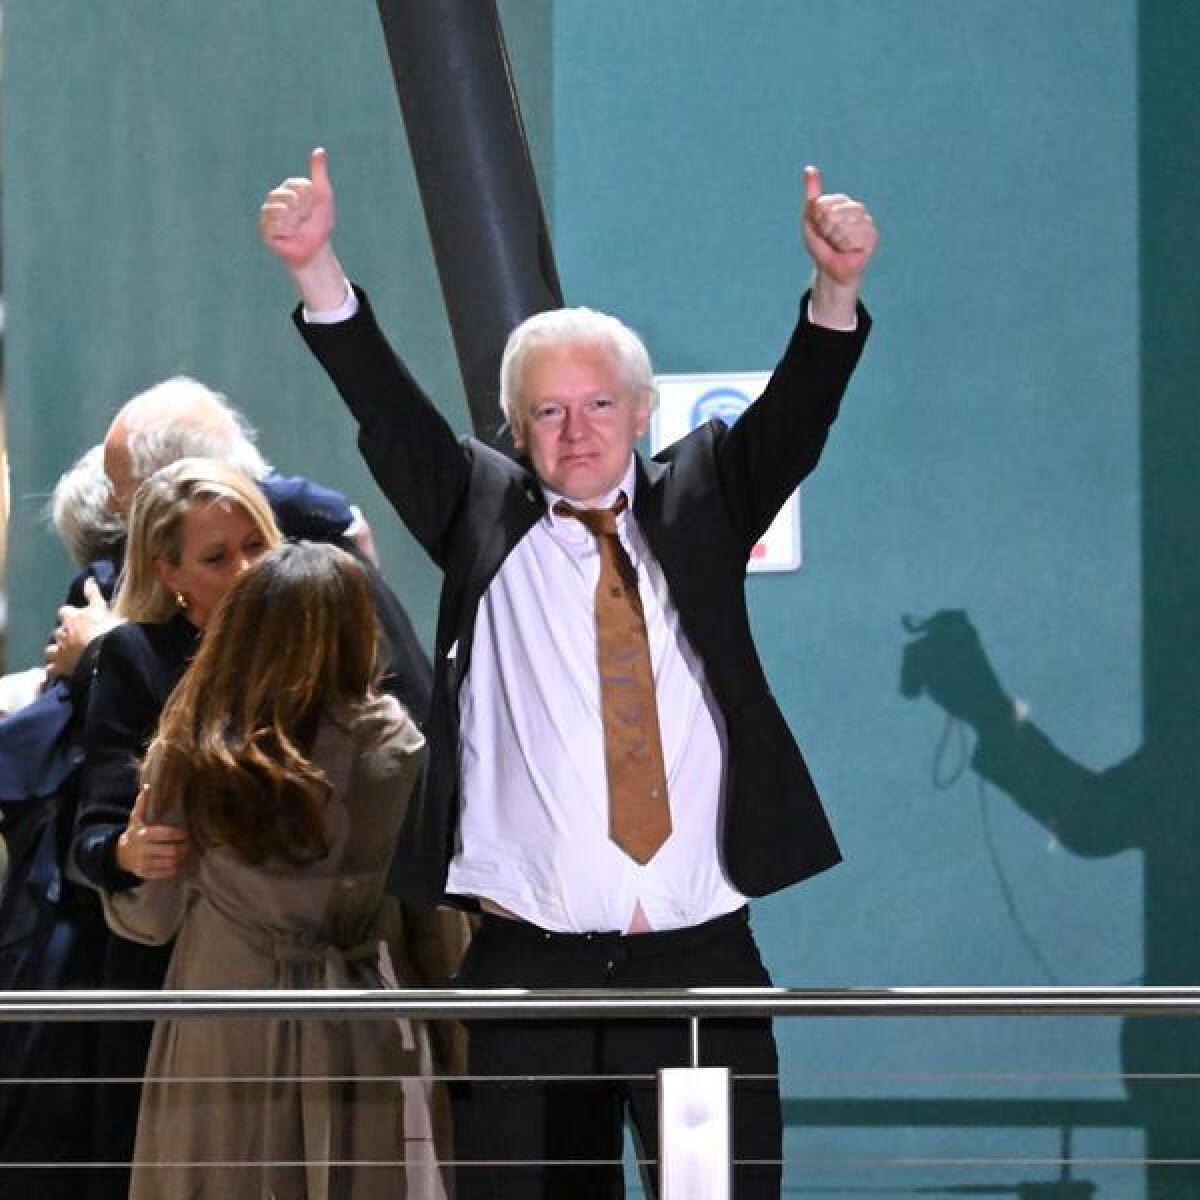 WikiLeaks founder Julian Assange give the thumbs up to supporters